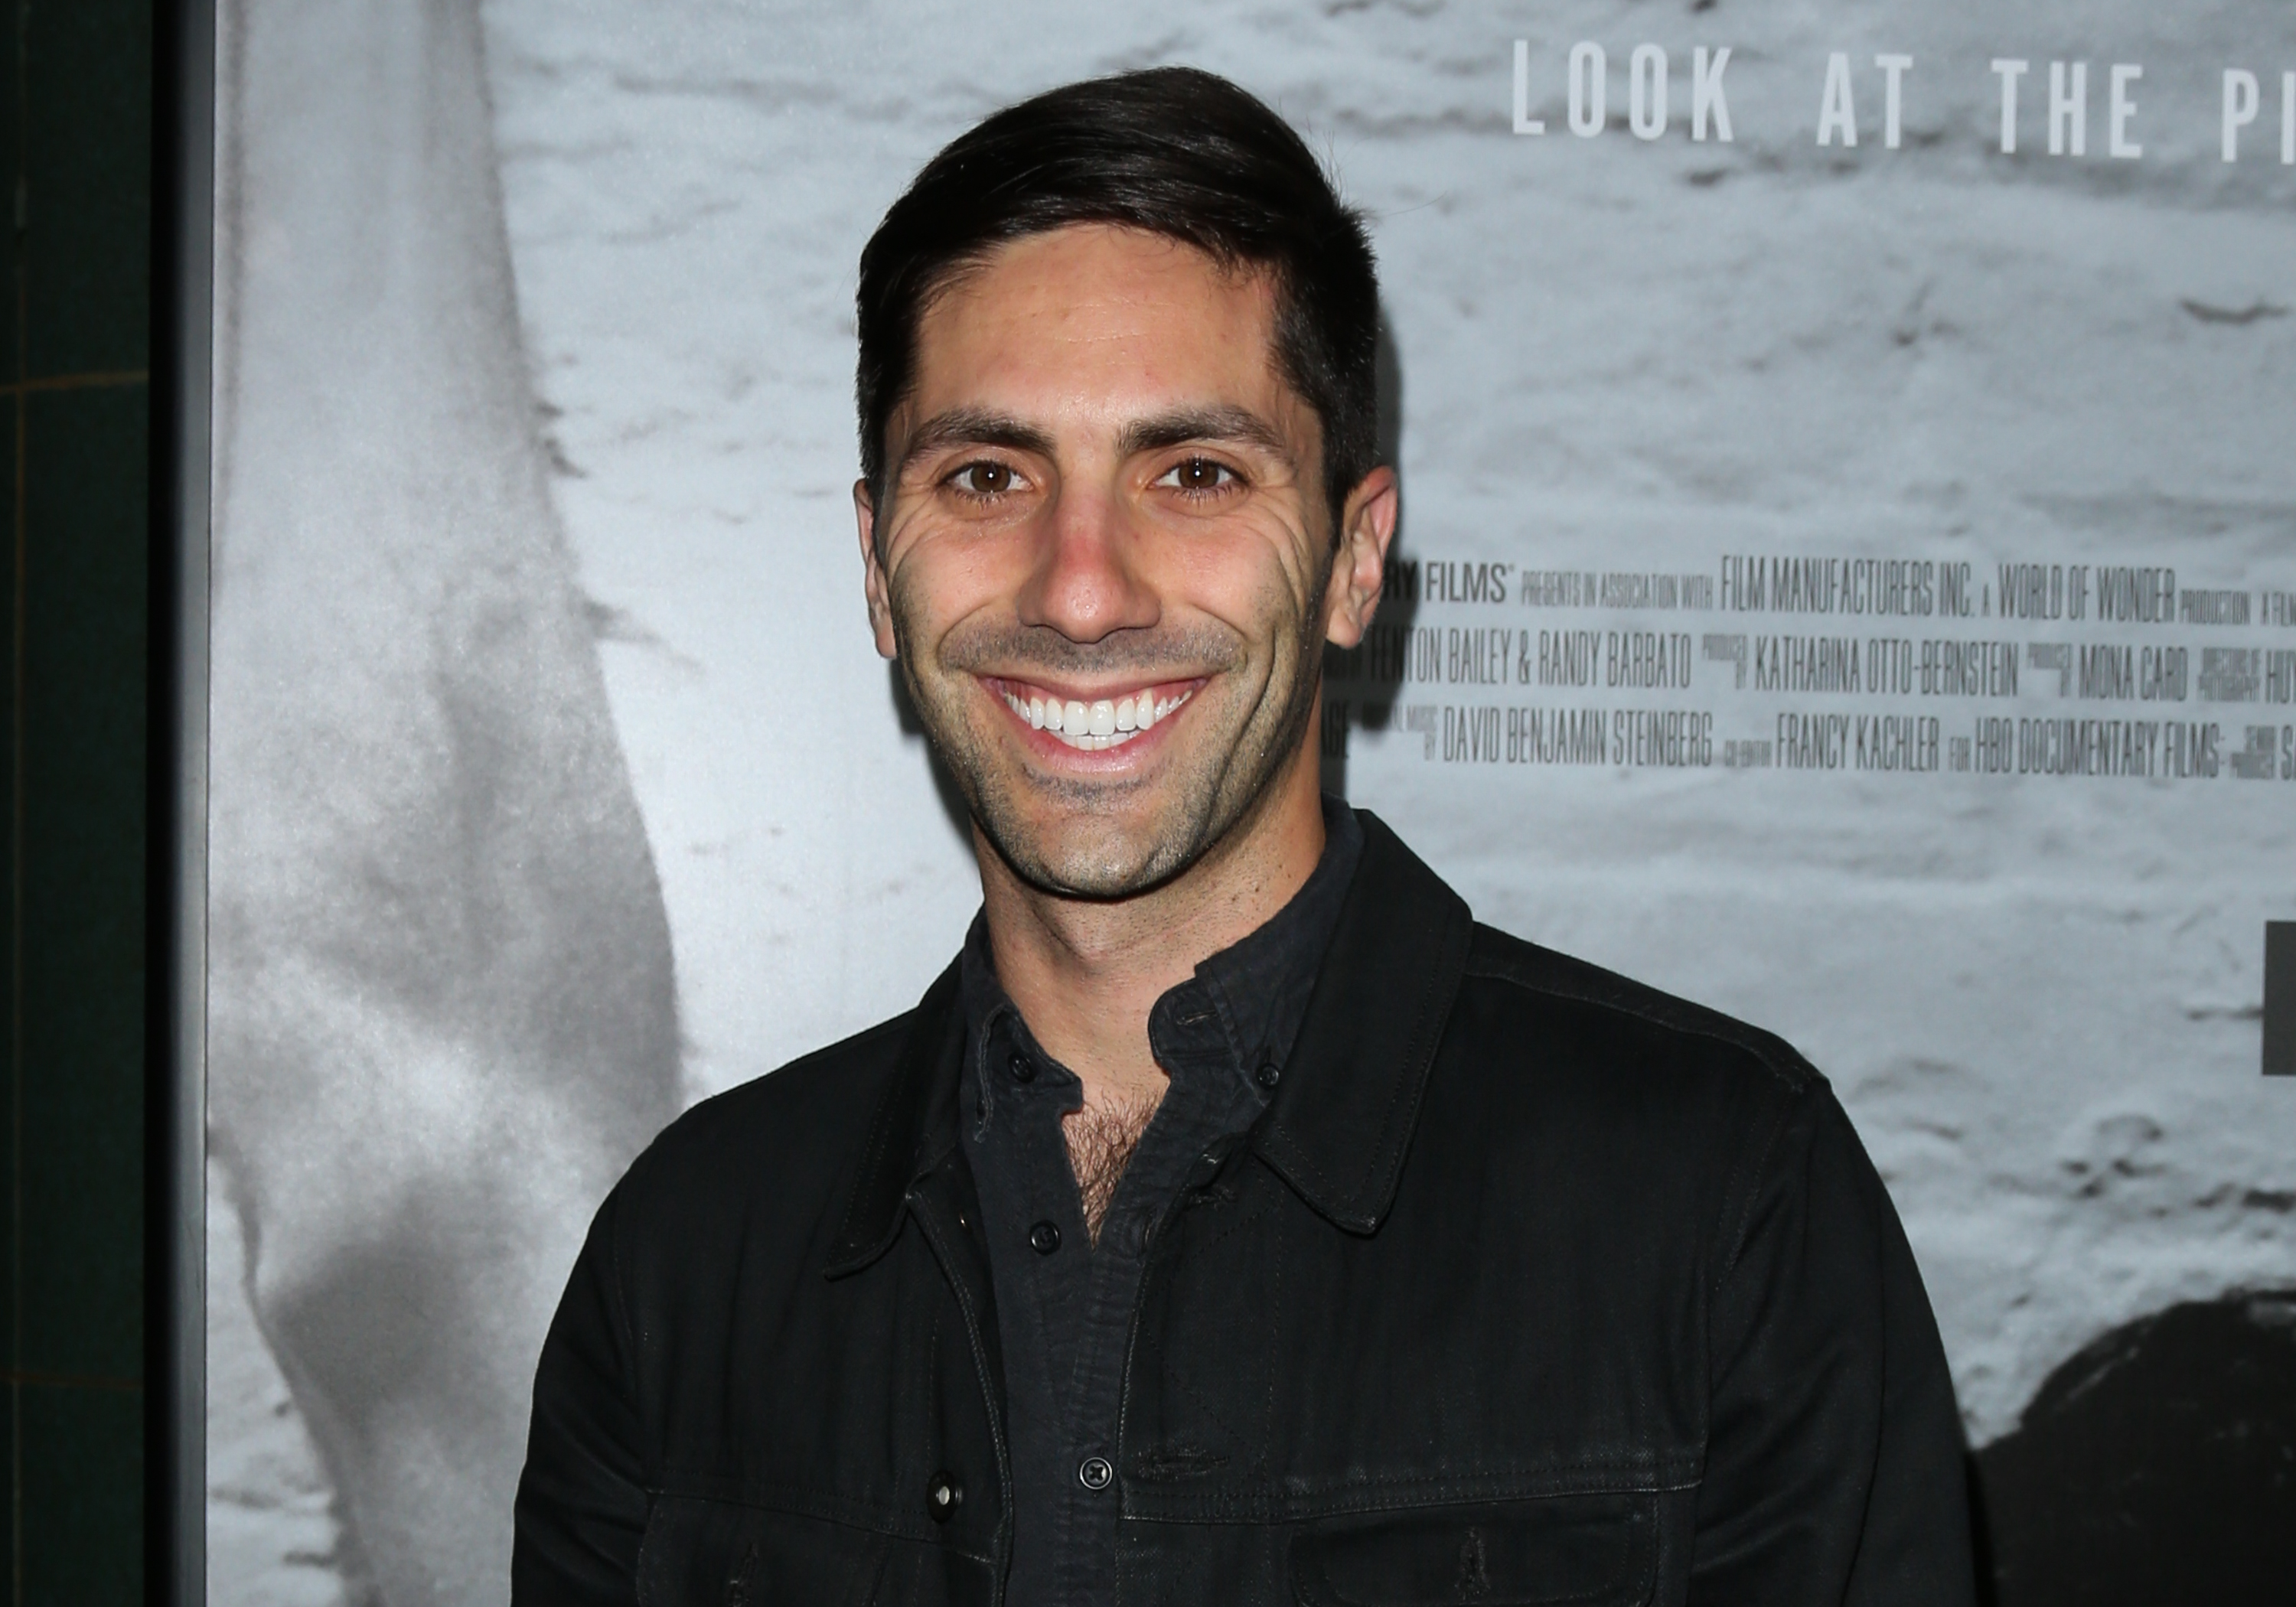 Nev Schulman attends the premiere of HBO's documentary film "Mapplethorpe: Look At The Pictures" on March 15, 2016 in Los Angeles, California. 